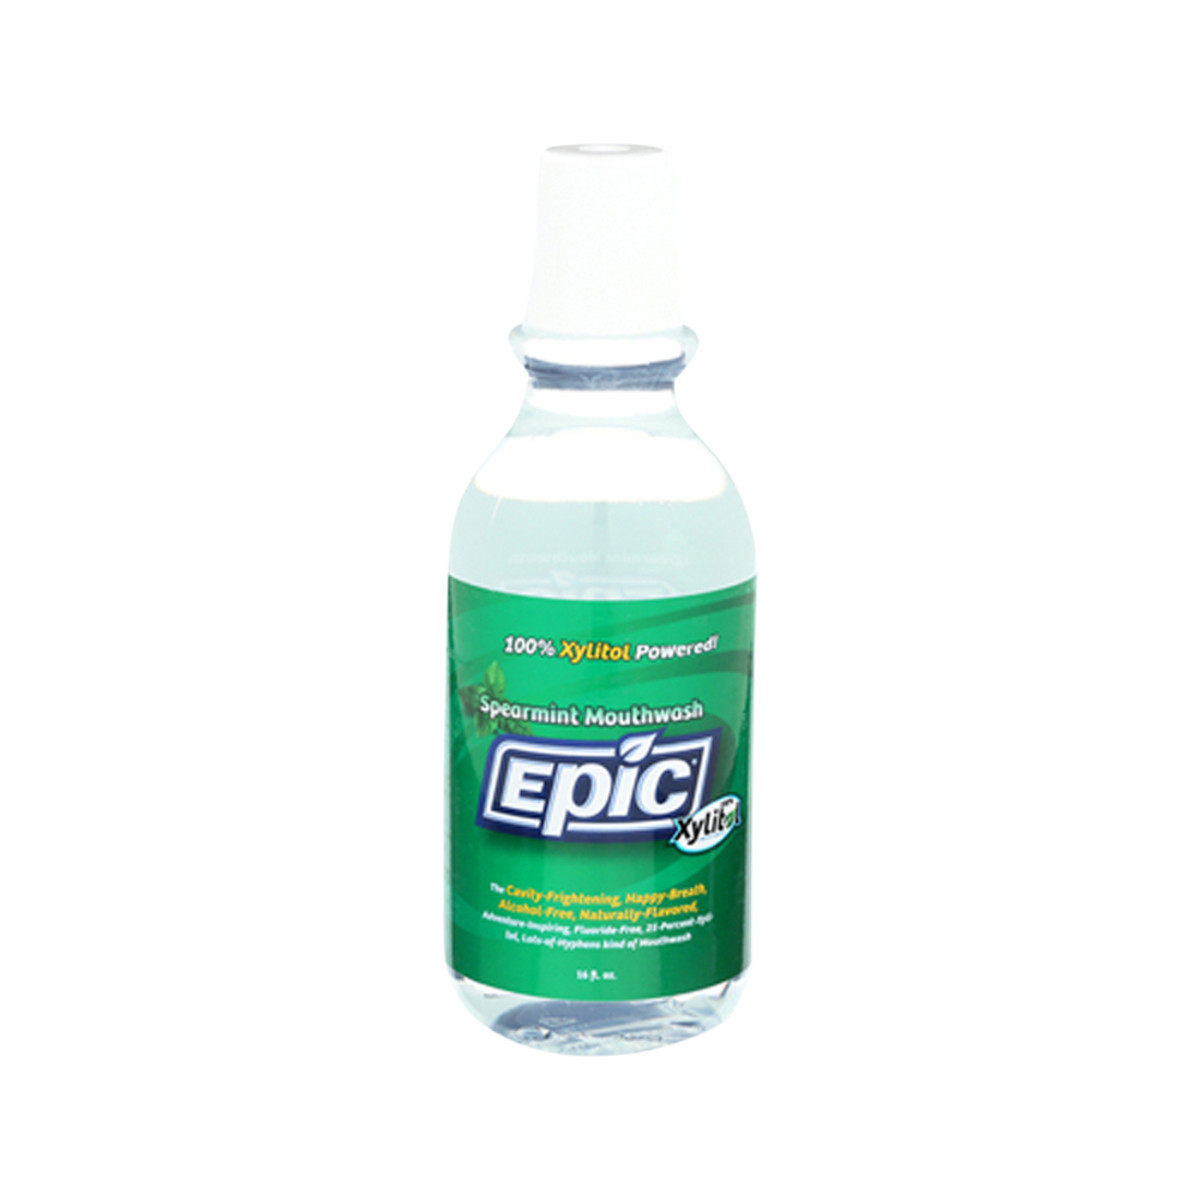 Epic Alcohol-Free Mouthwash Spearmint with Xylitol 475ml